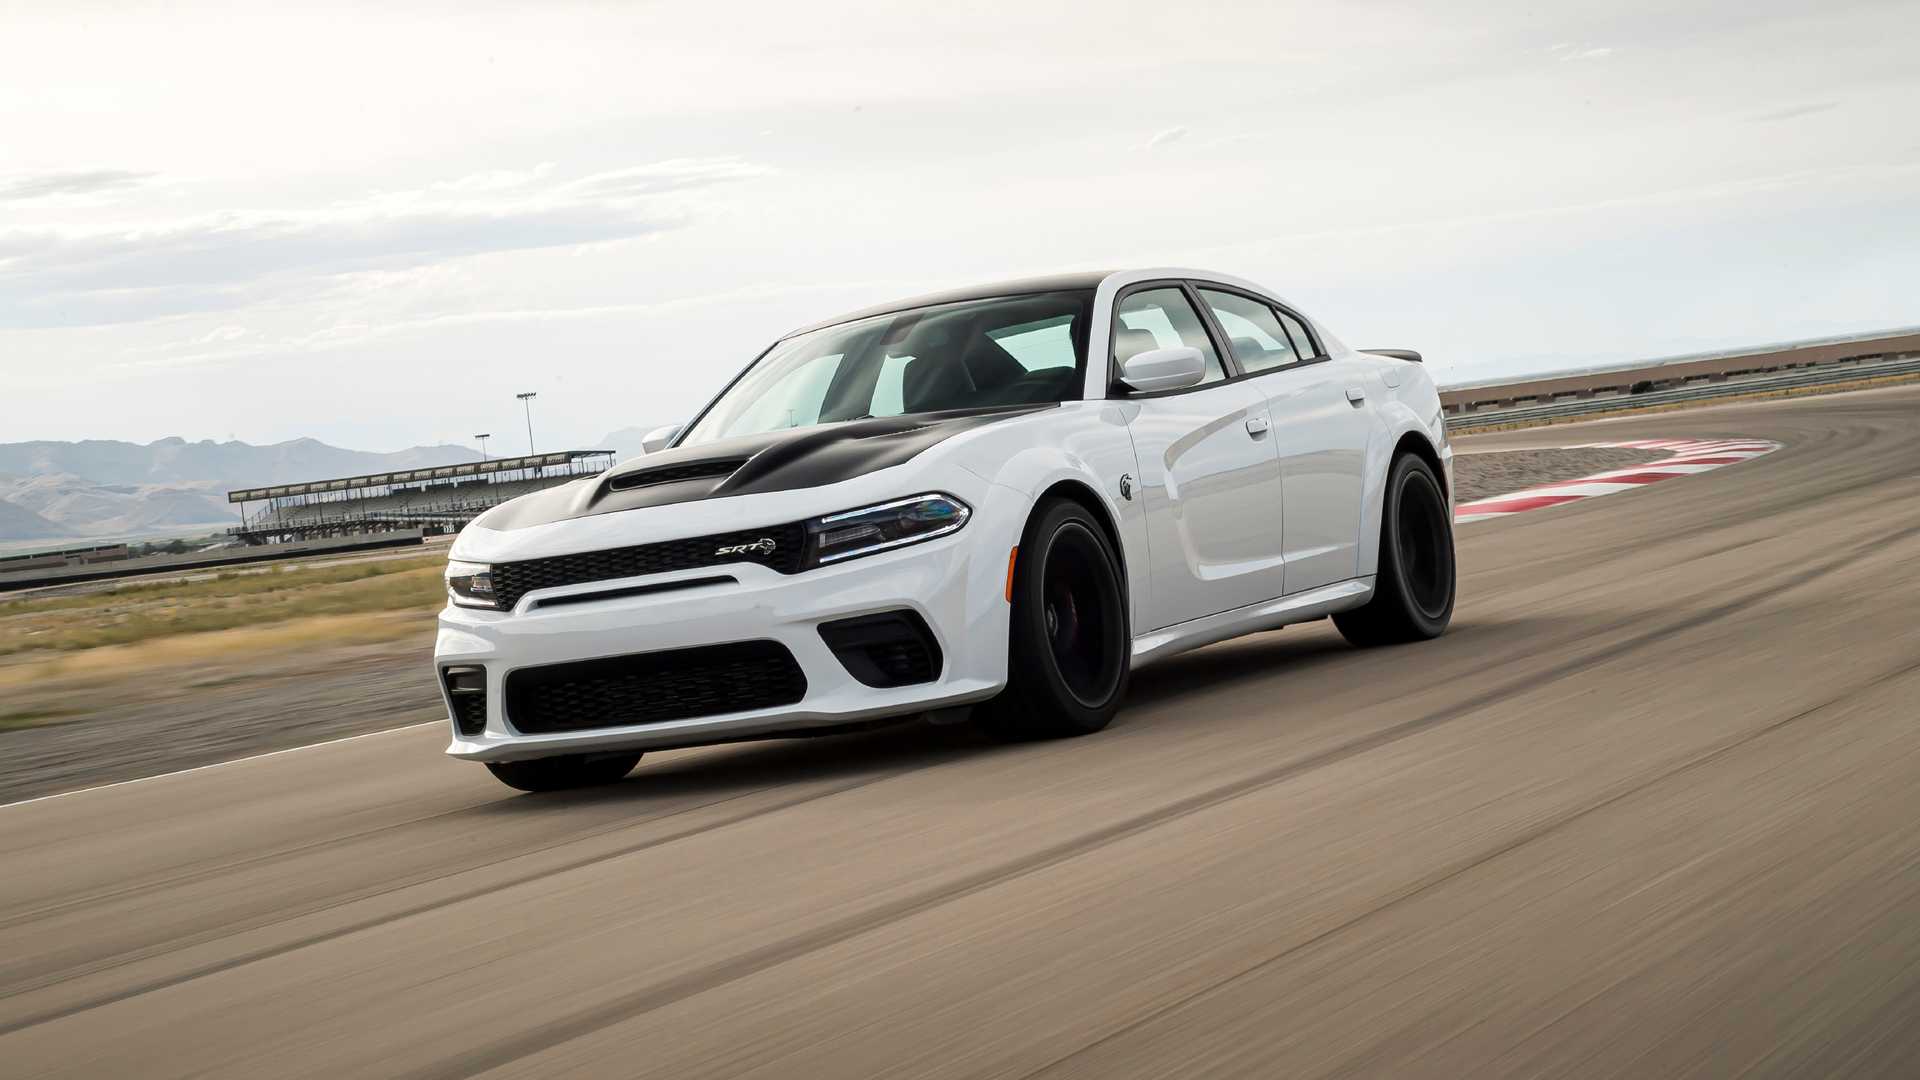 Dodge Charger SRT Hellcat Redeye Widebody front angular view in the motion